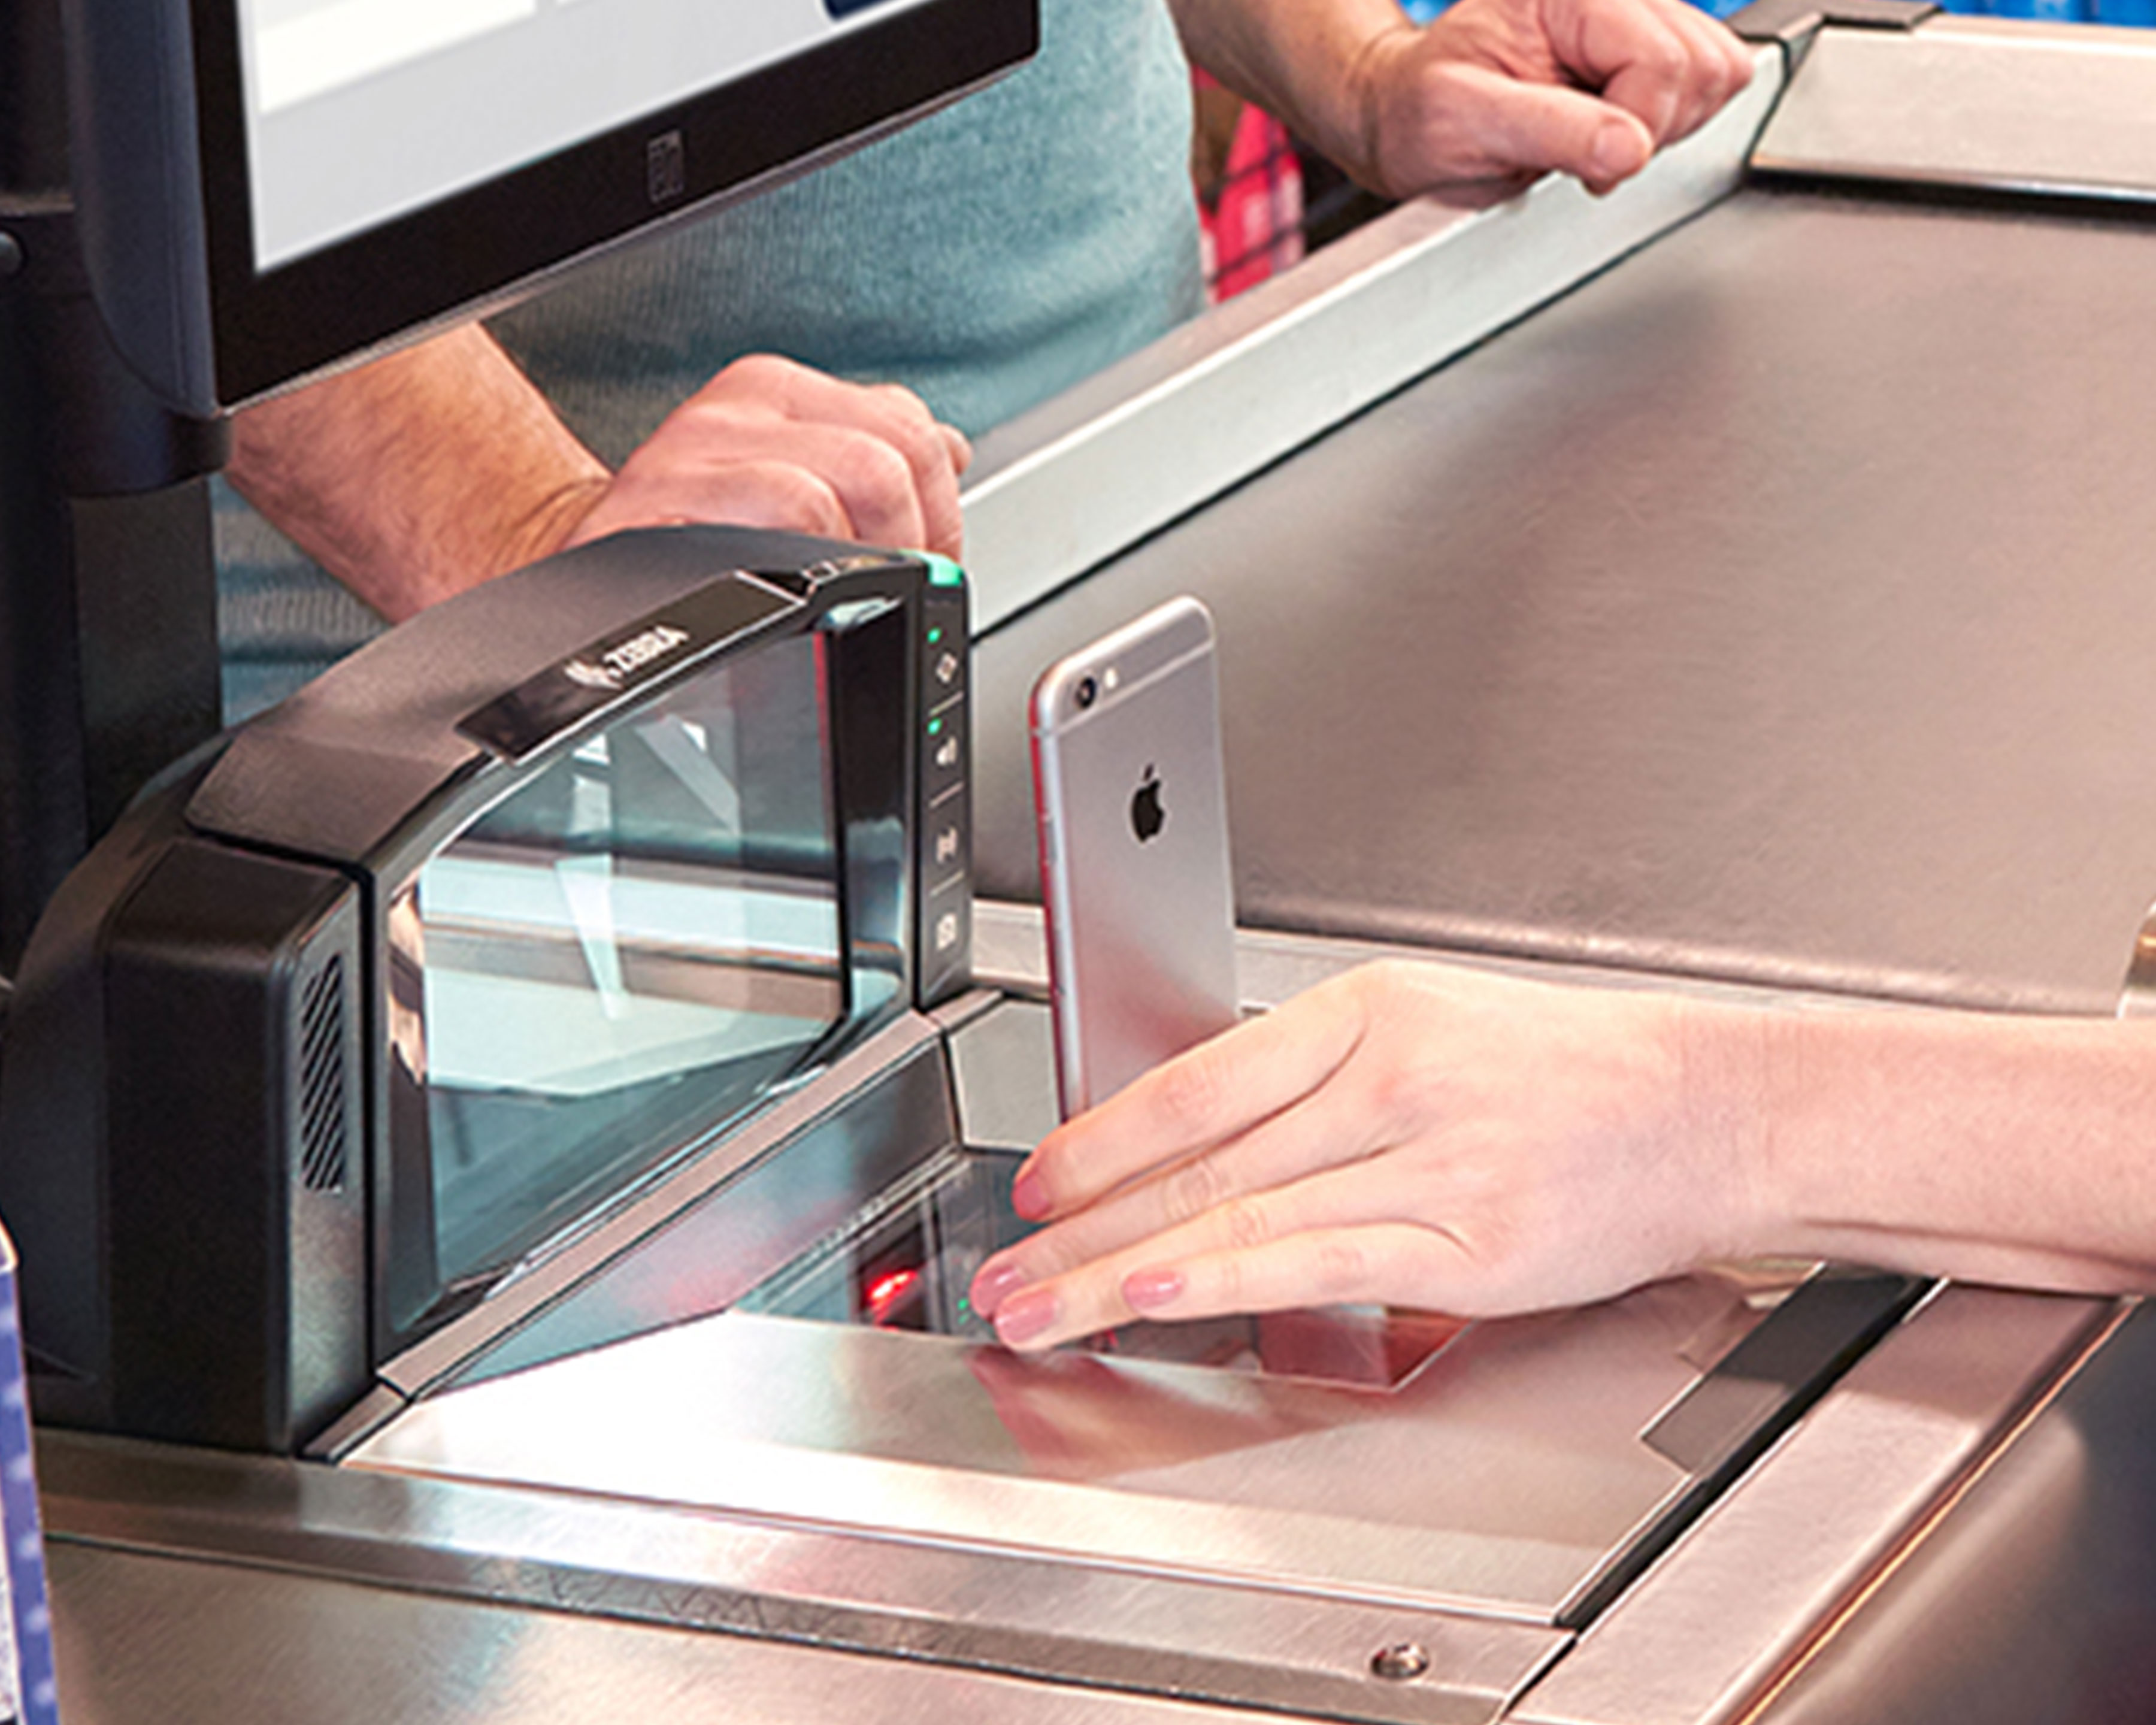 Grocery store cashier uses Zebra MP7000 scale scanner to scan the screen of a mobile phone